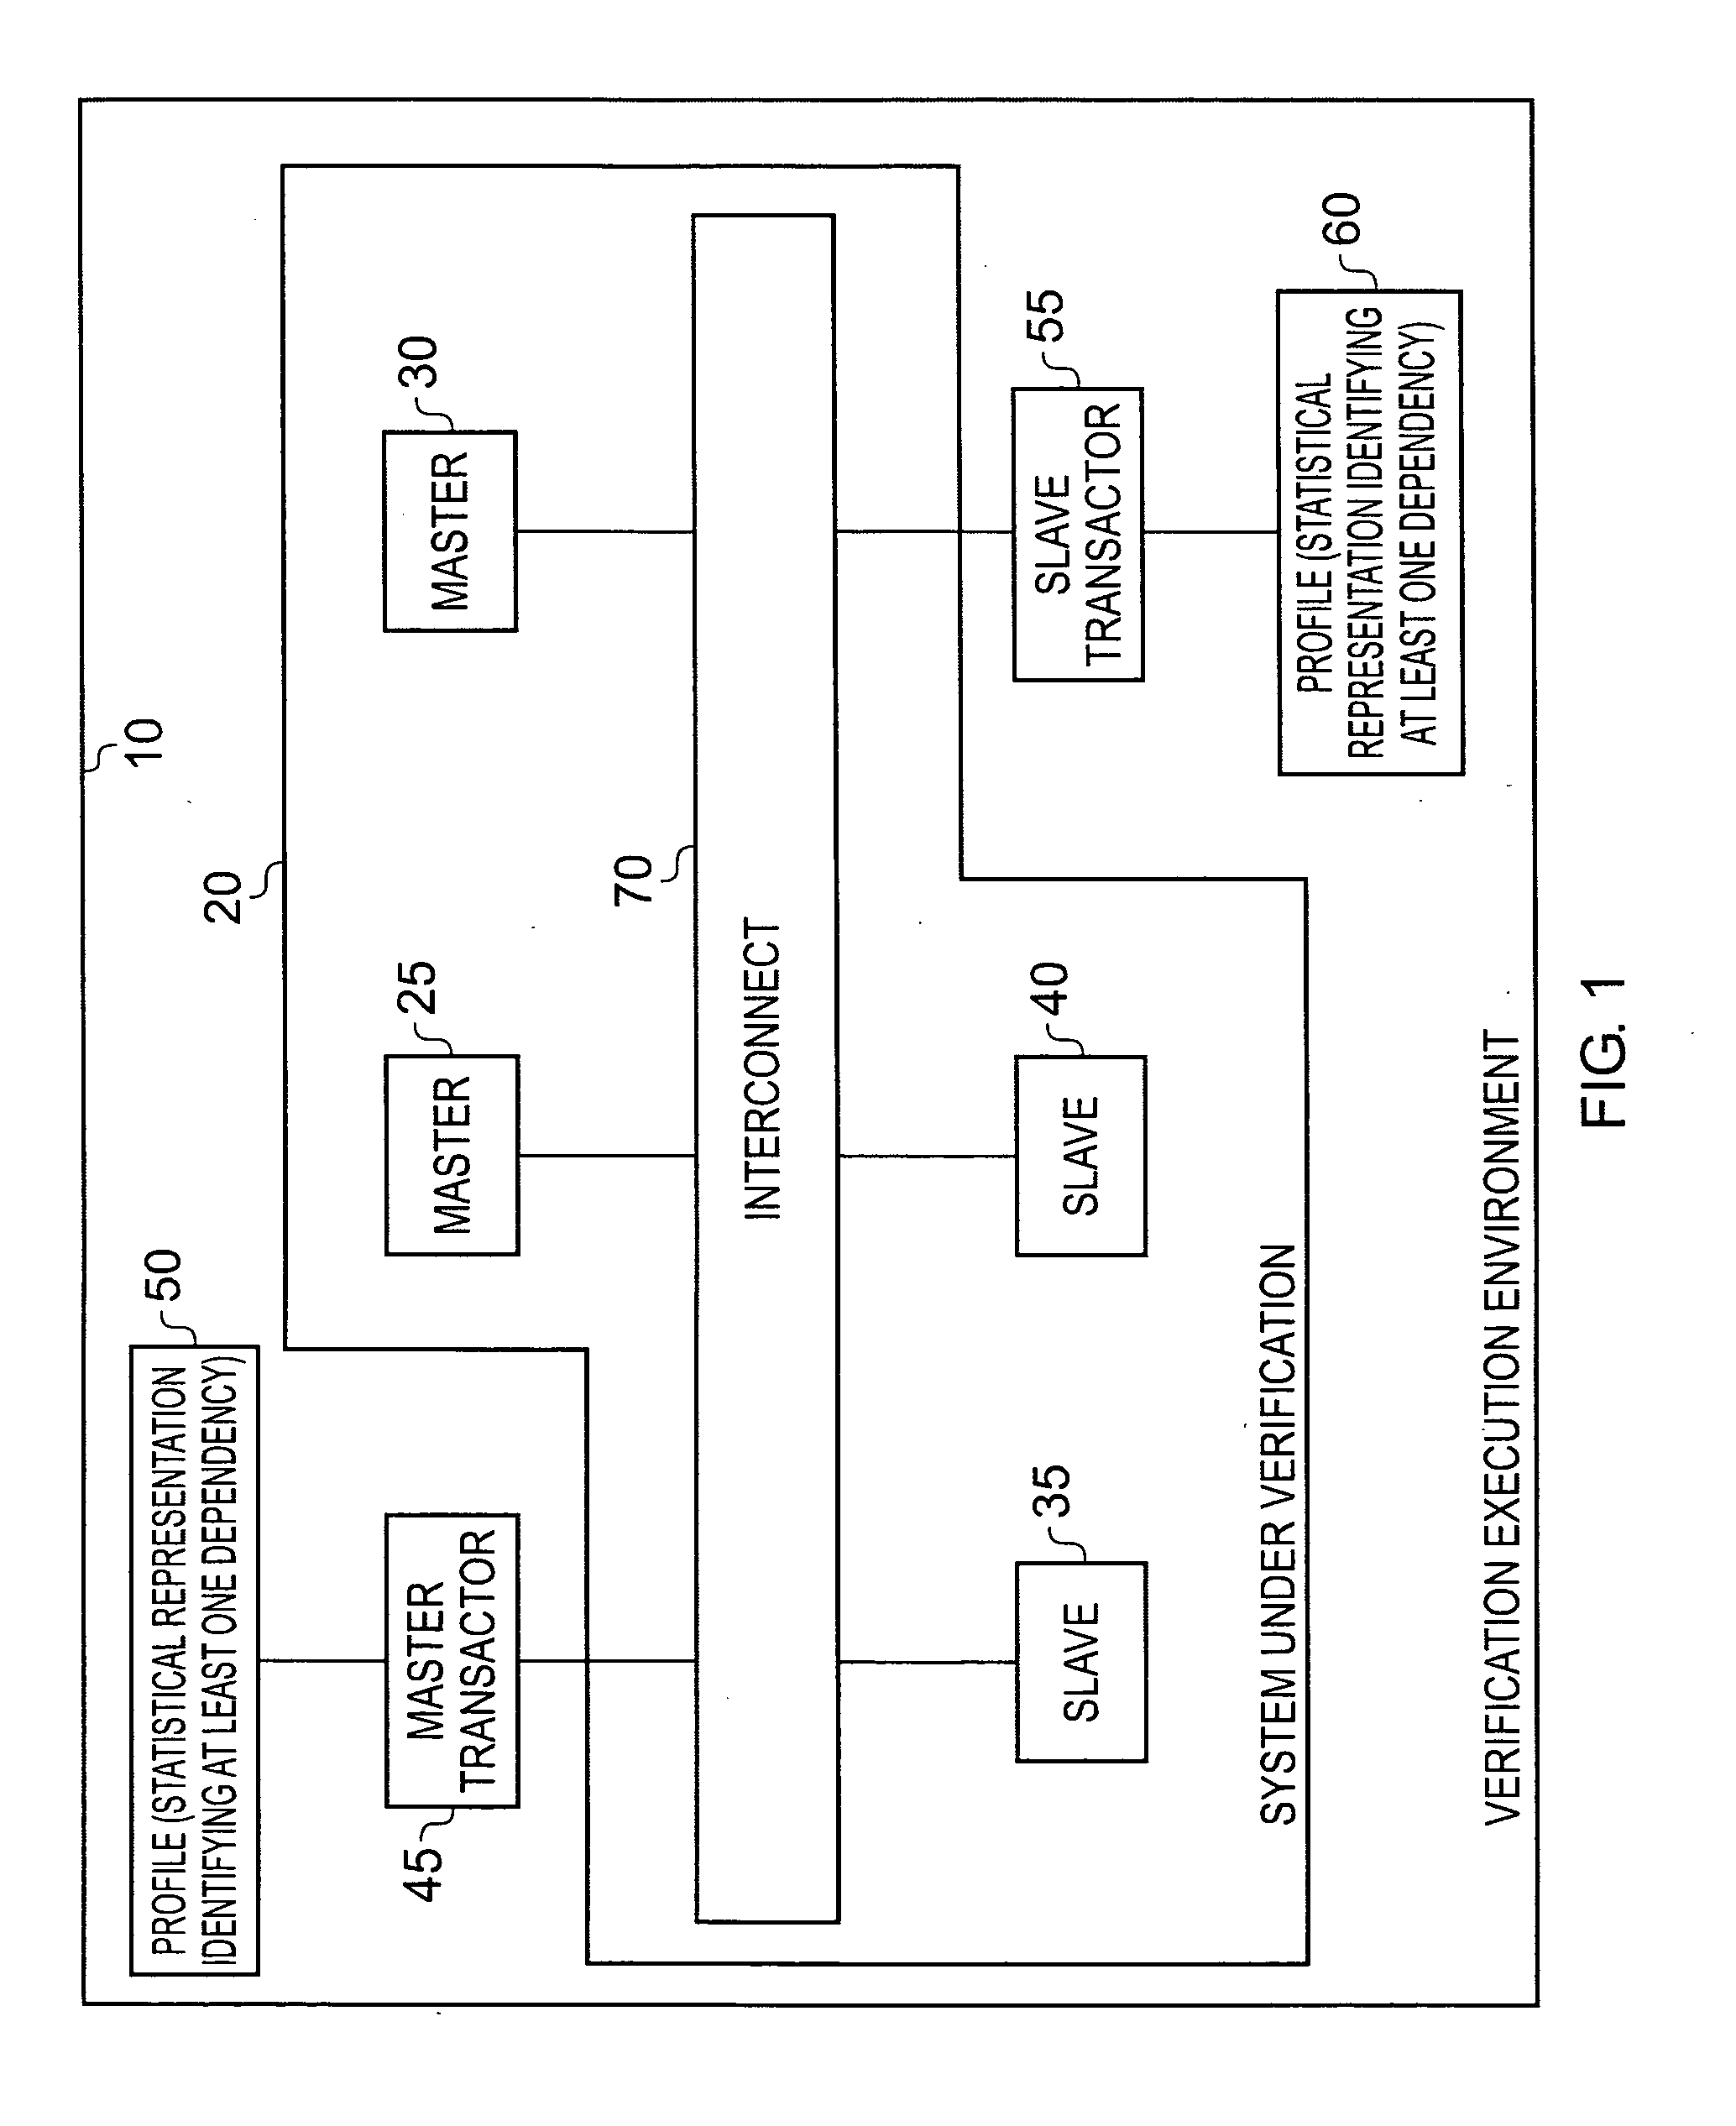 Use of statistical representations of traffic flow in a data processing system